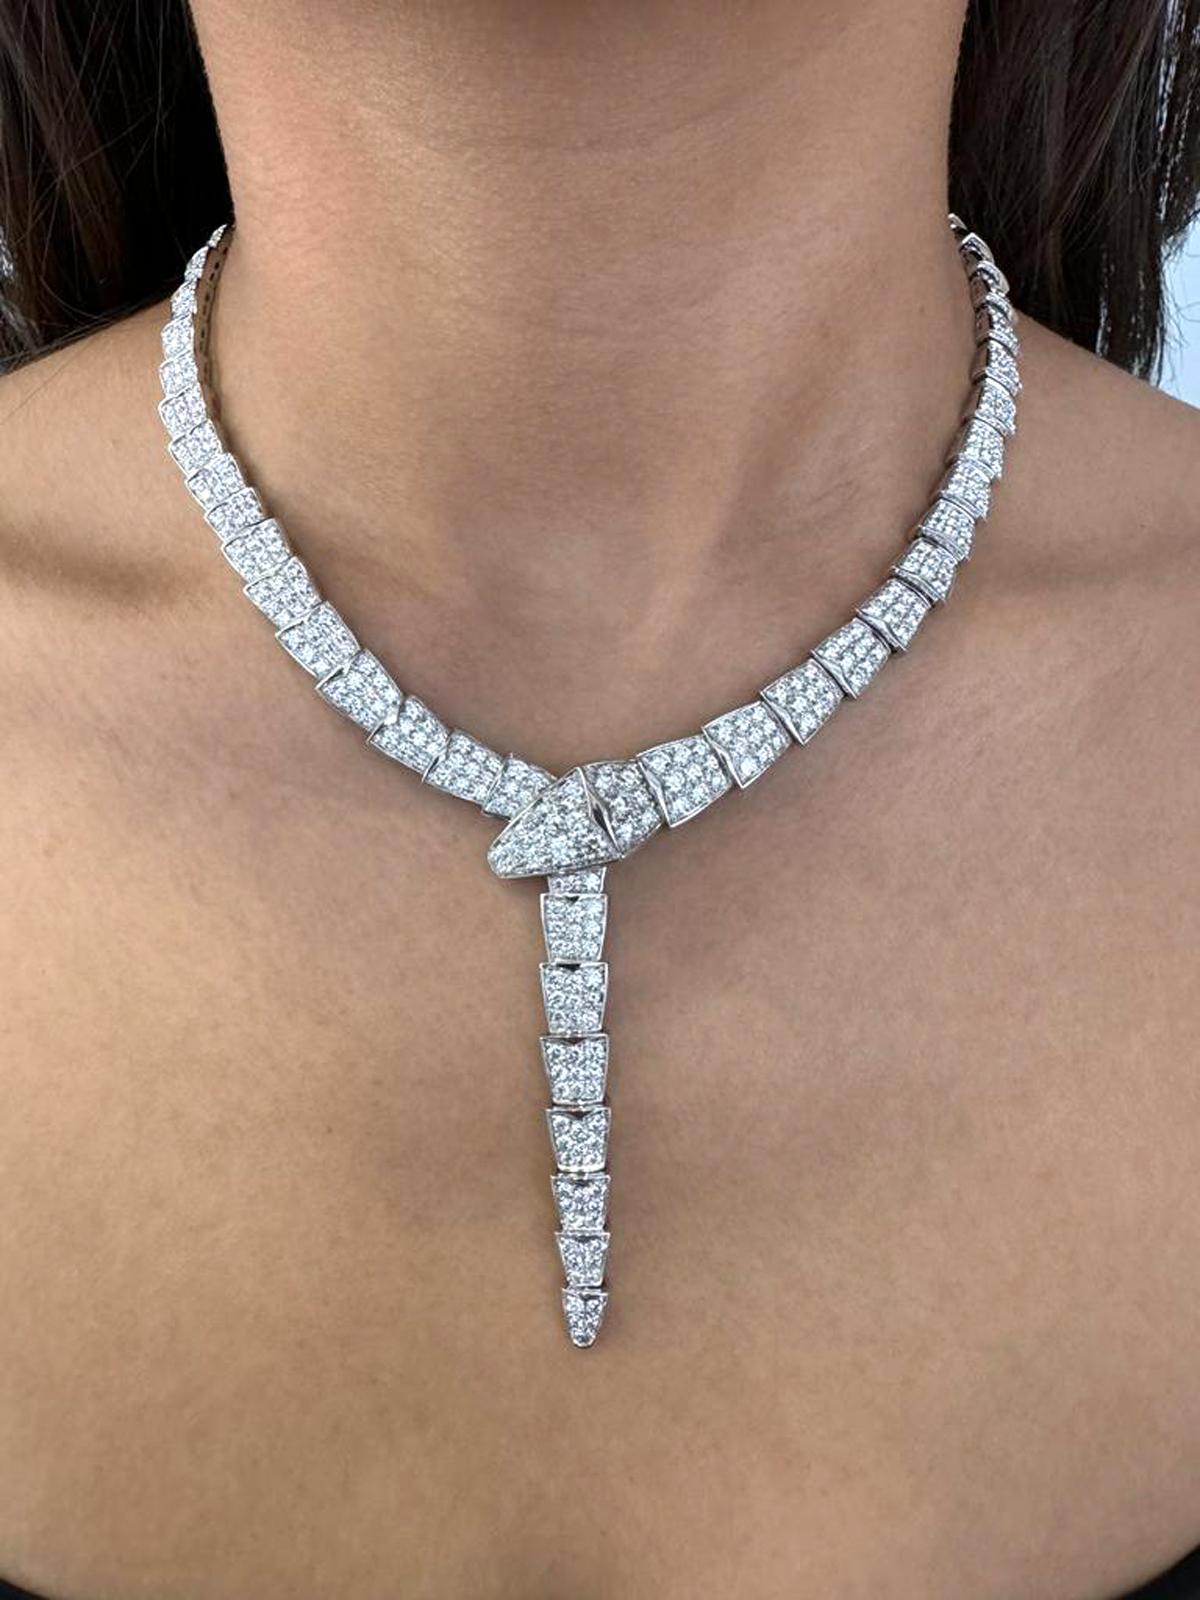 From the renowned Bvlgari of Italy, emerges a masterpiece from their Serpenti collection – an exquisite necklace meticulously crafted in 18-karat white gold. Prepare to envelop yourself in the radiant embrace of 14.74 carats of round brilliant-cut